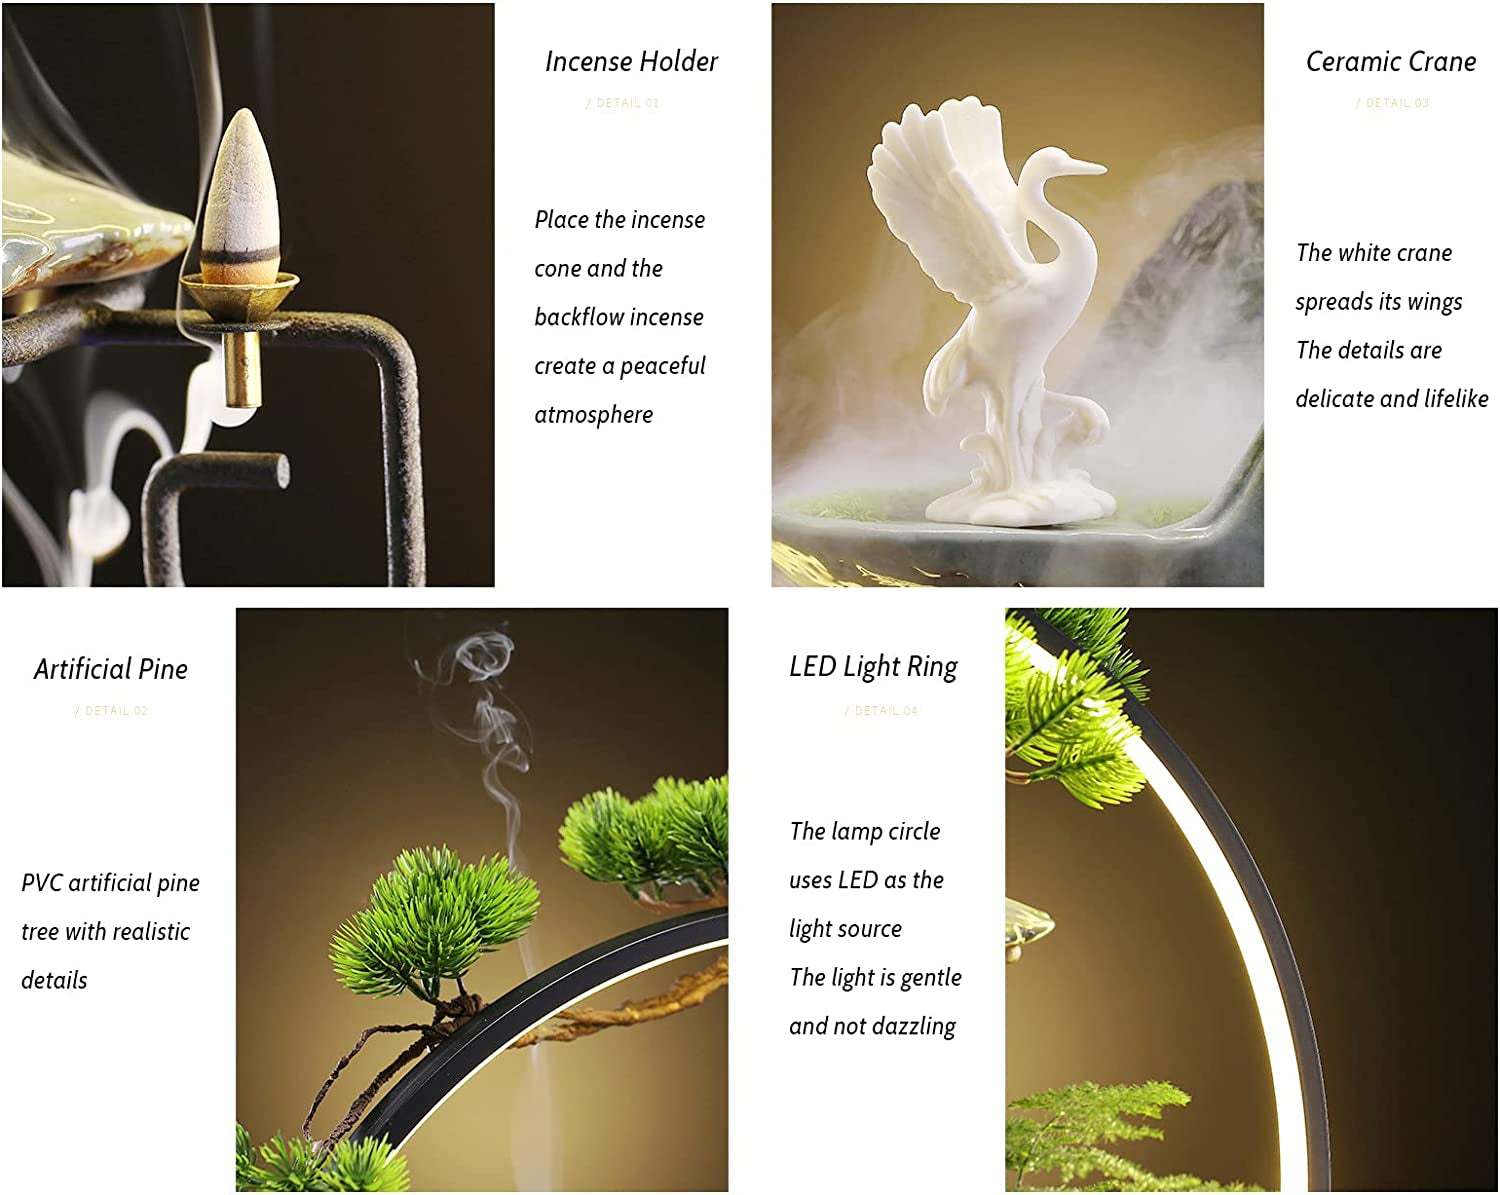 Tabletop Water Fountain, Indoor Waterfall with round LED Light Ceramic Crane Mist Maker and Incense Holder for Home Office Decor